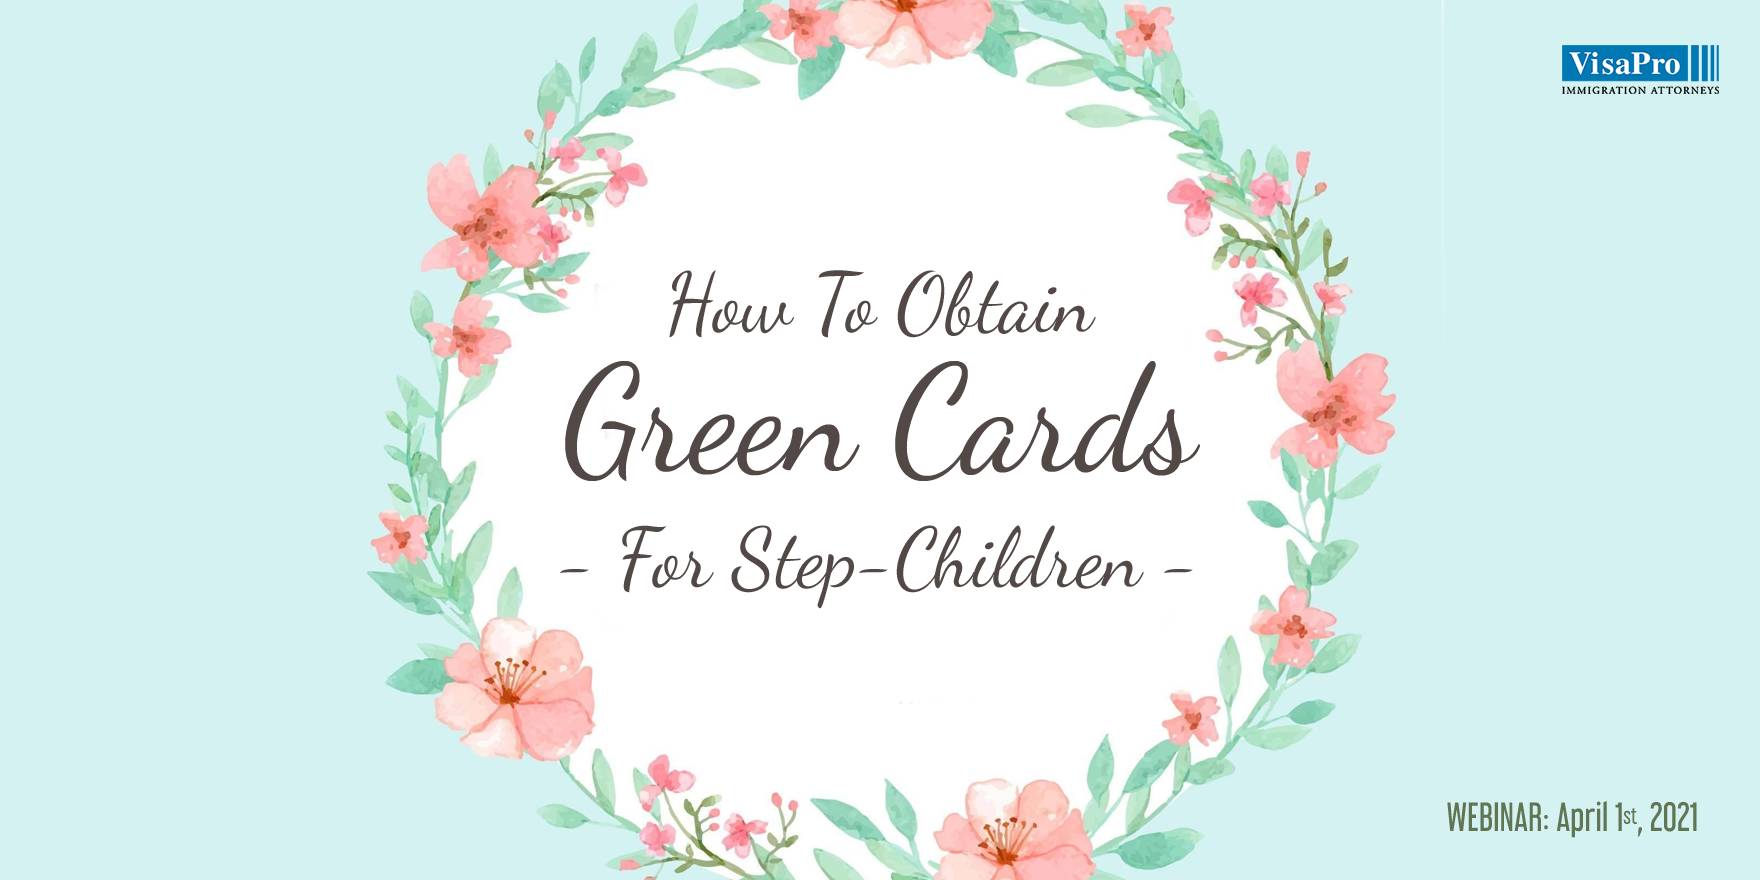 Immigration Seminar: How To Obtain Green Cards For Step-Children, Manila, Philippines